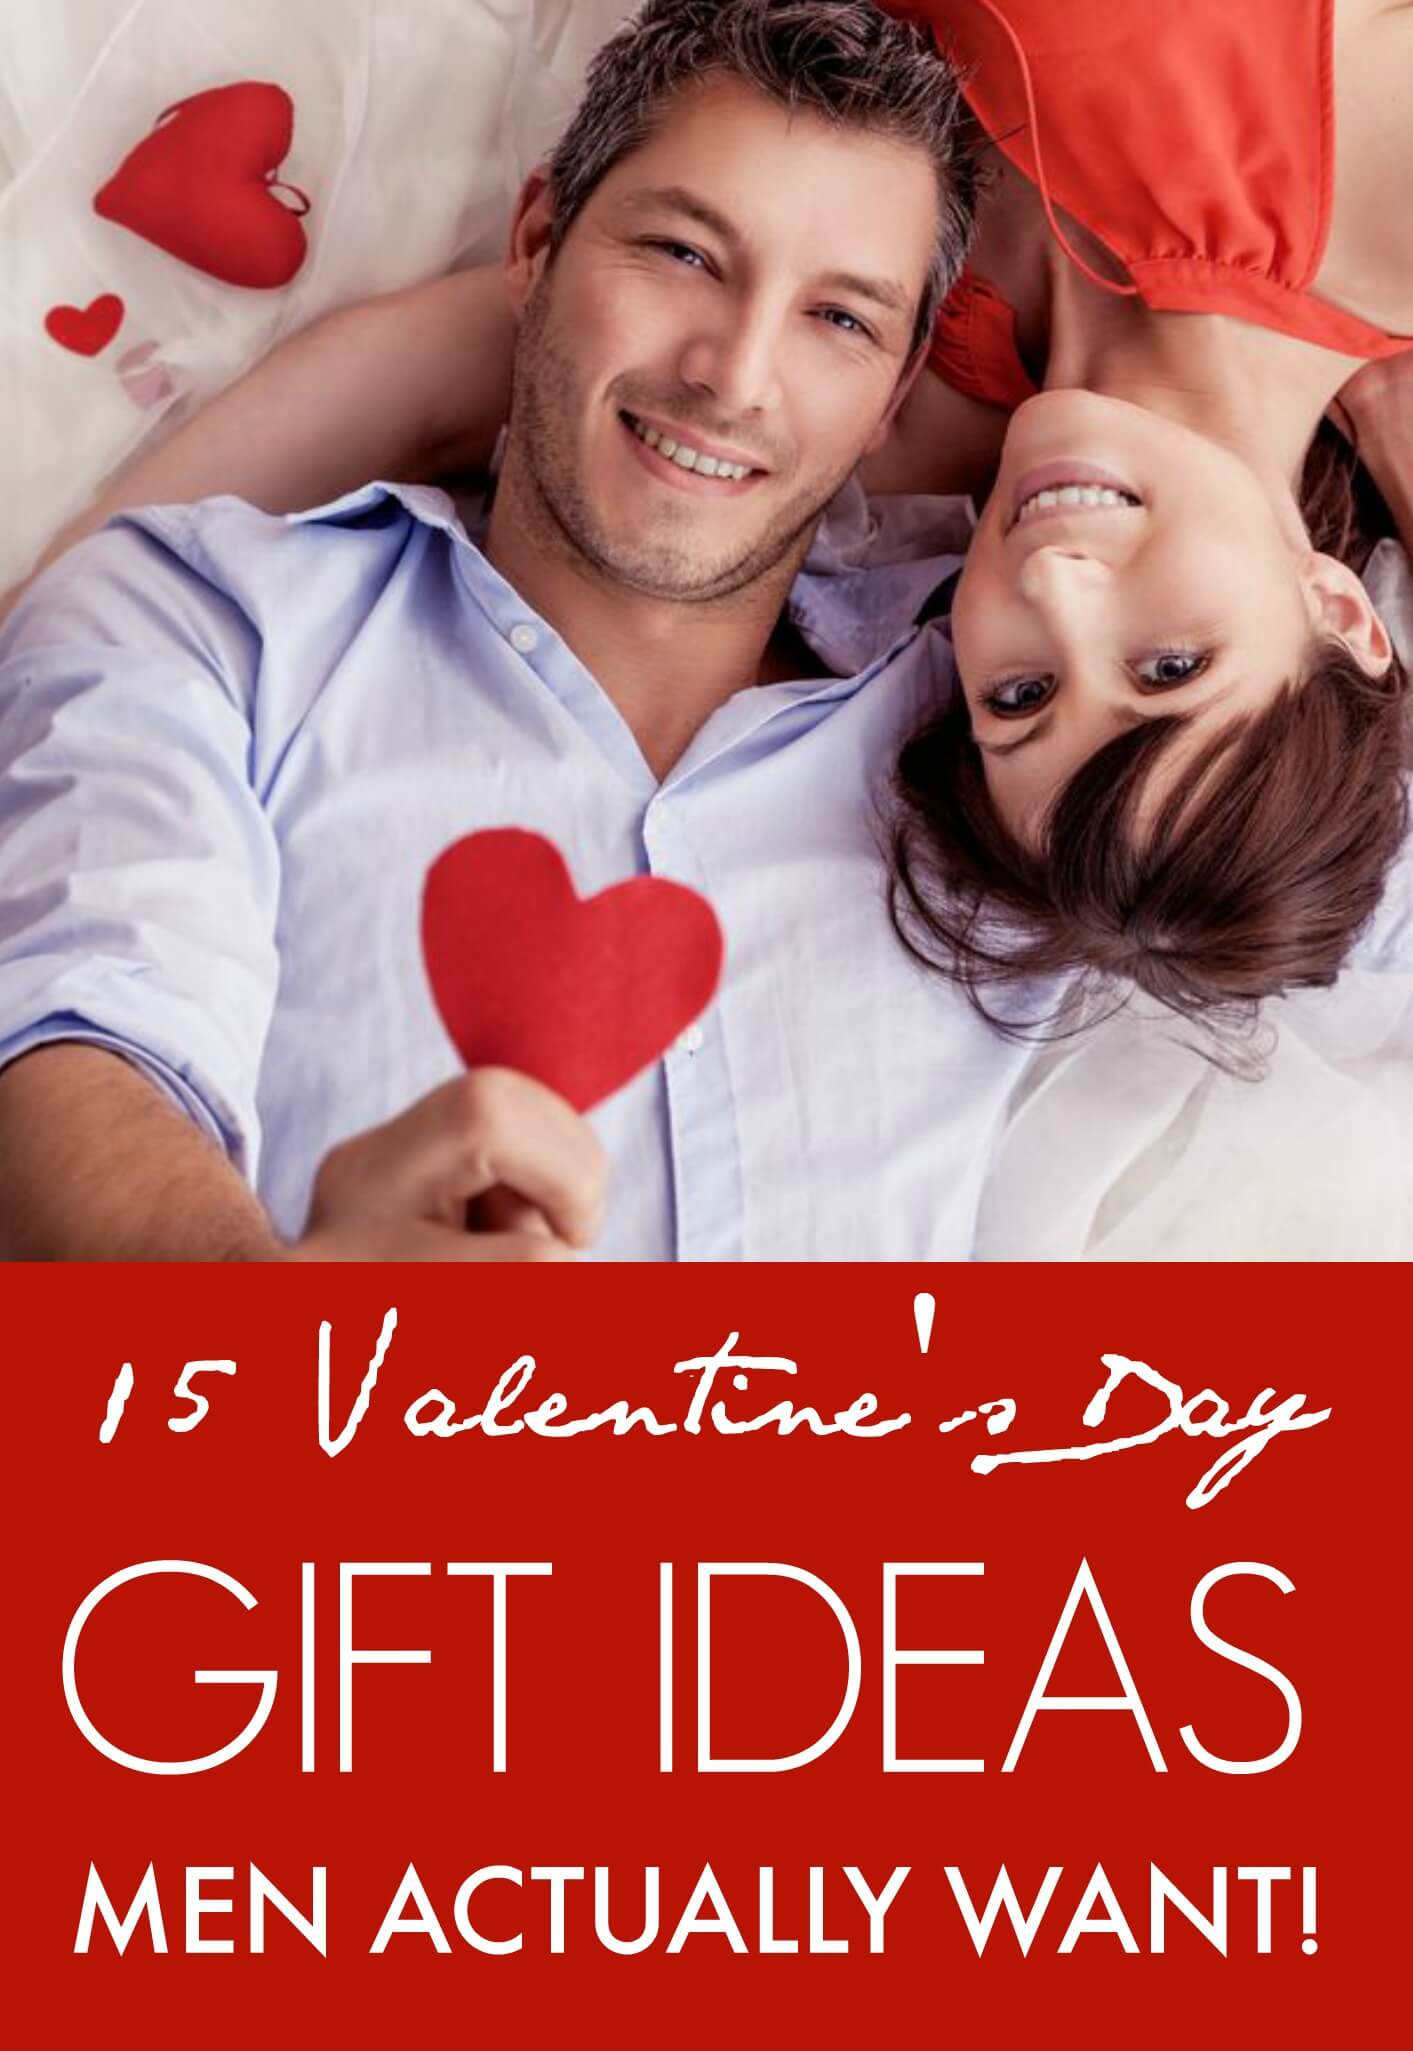 Valentines Gift Ideas For Men
 15 Valentine’s Day Gift ideas Men Actually Want